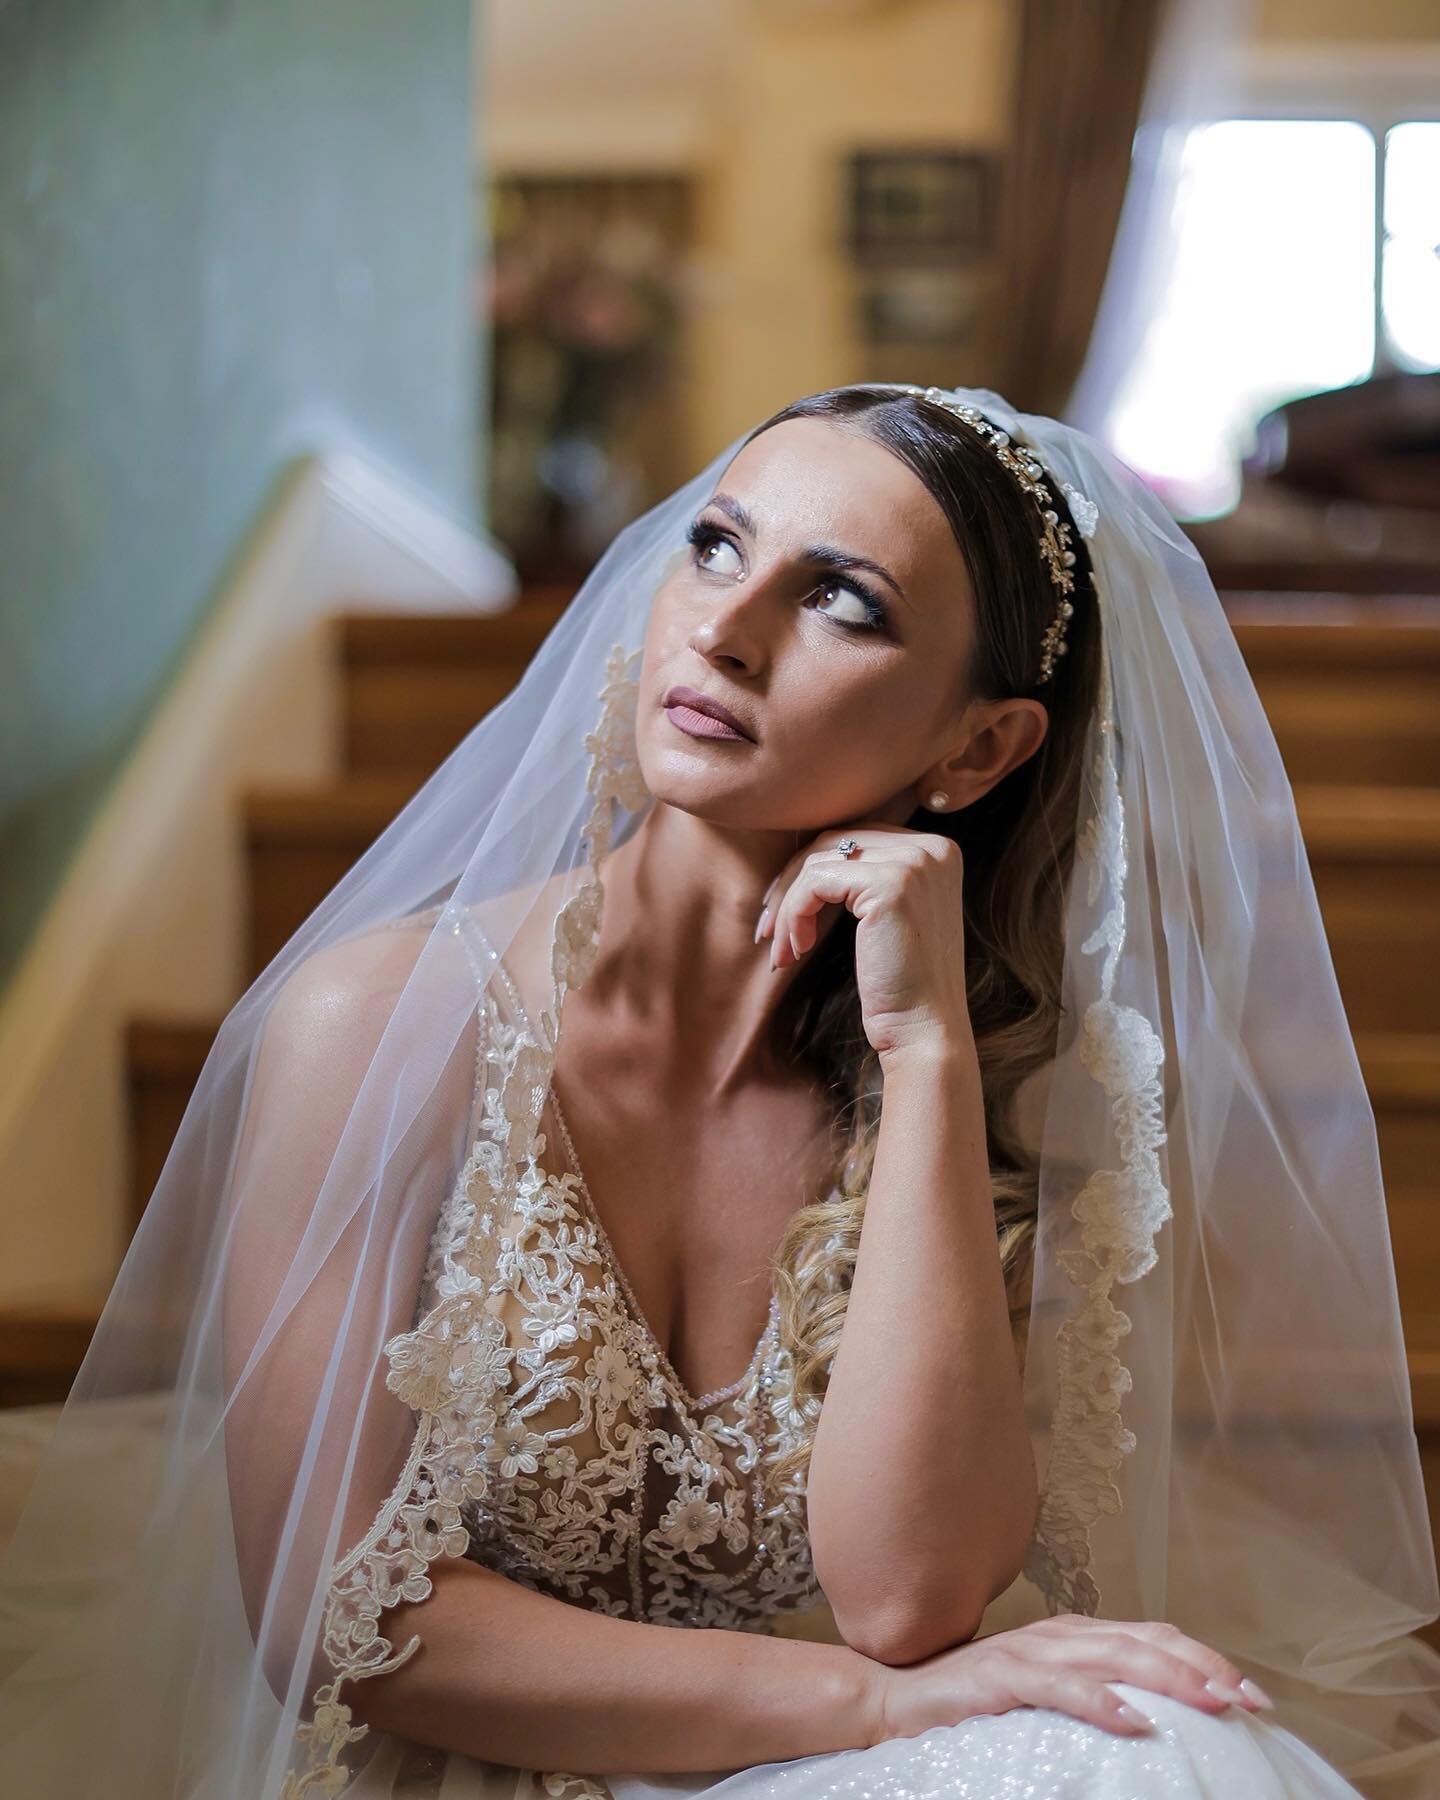 My bride Sofia a few seconds before we leave for the ceremony. 
All the stress heartache, planning every small detail that she needed to take care of culminated to this peaceful moment in the staircase&hellip;
A deep breath and we were off&hellip;
of